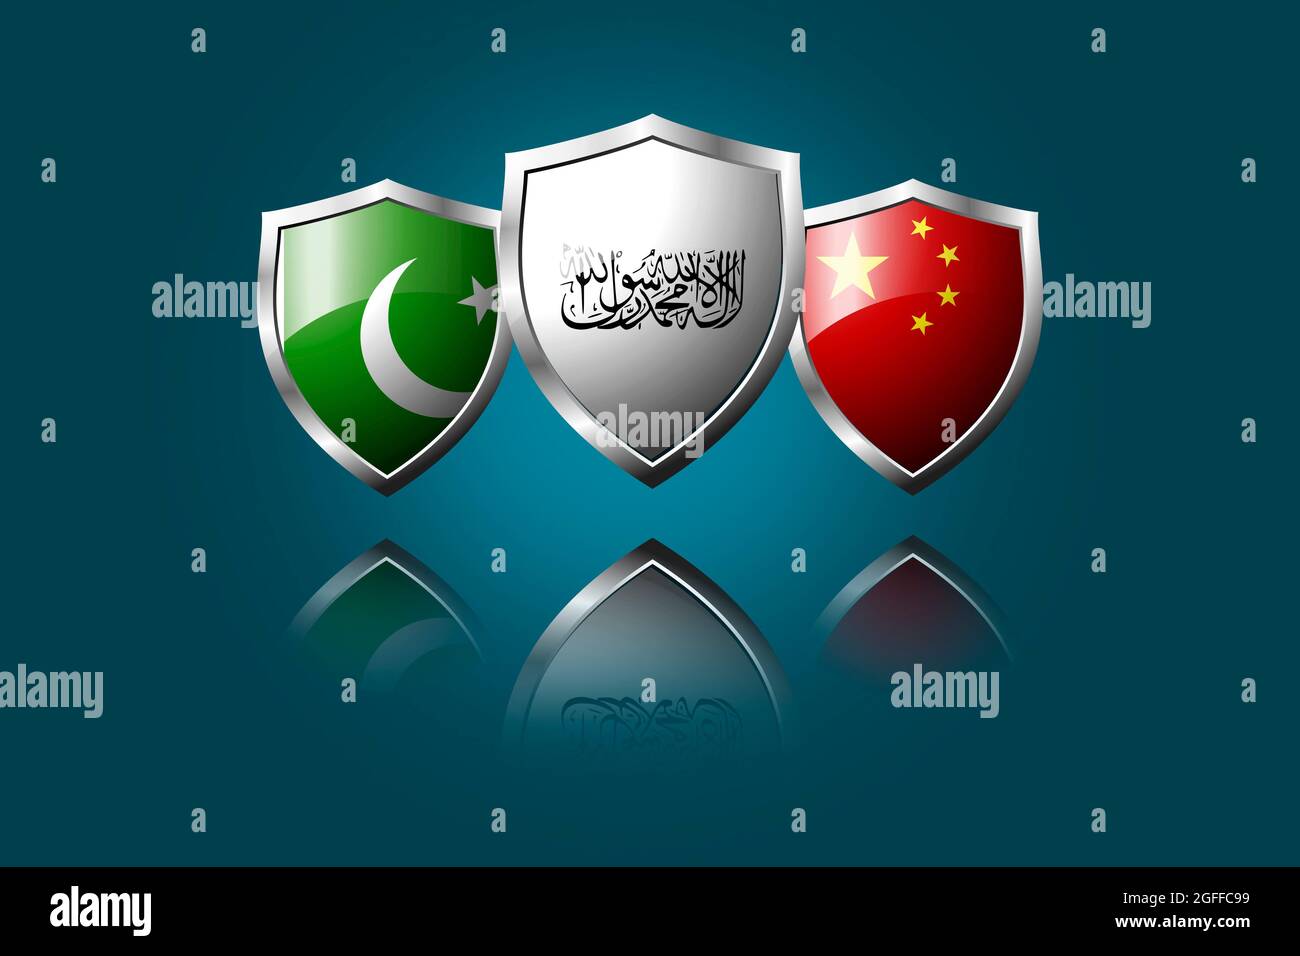 pakistan, taliban and china flags in shield. stock illustration. Stock Photo